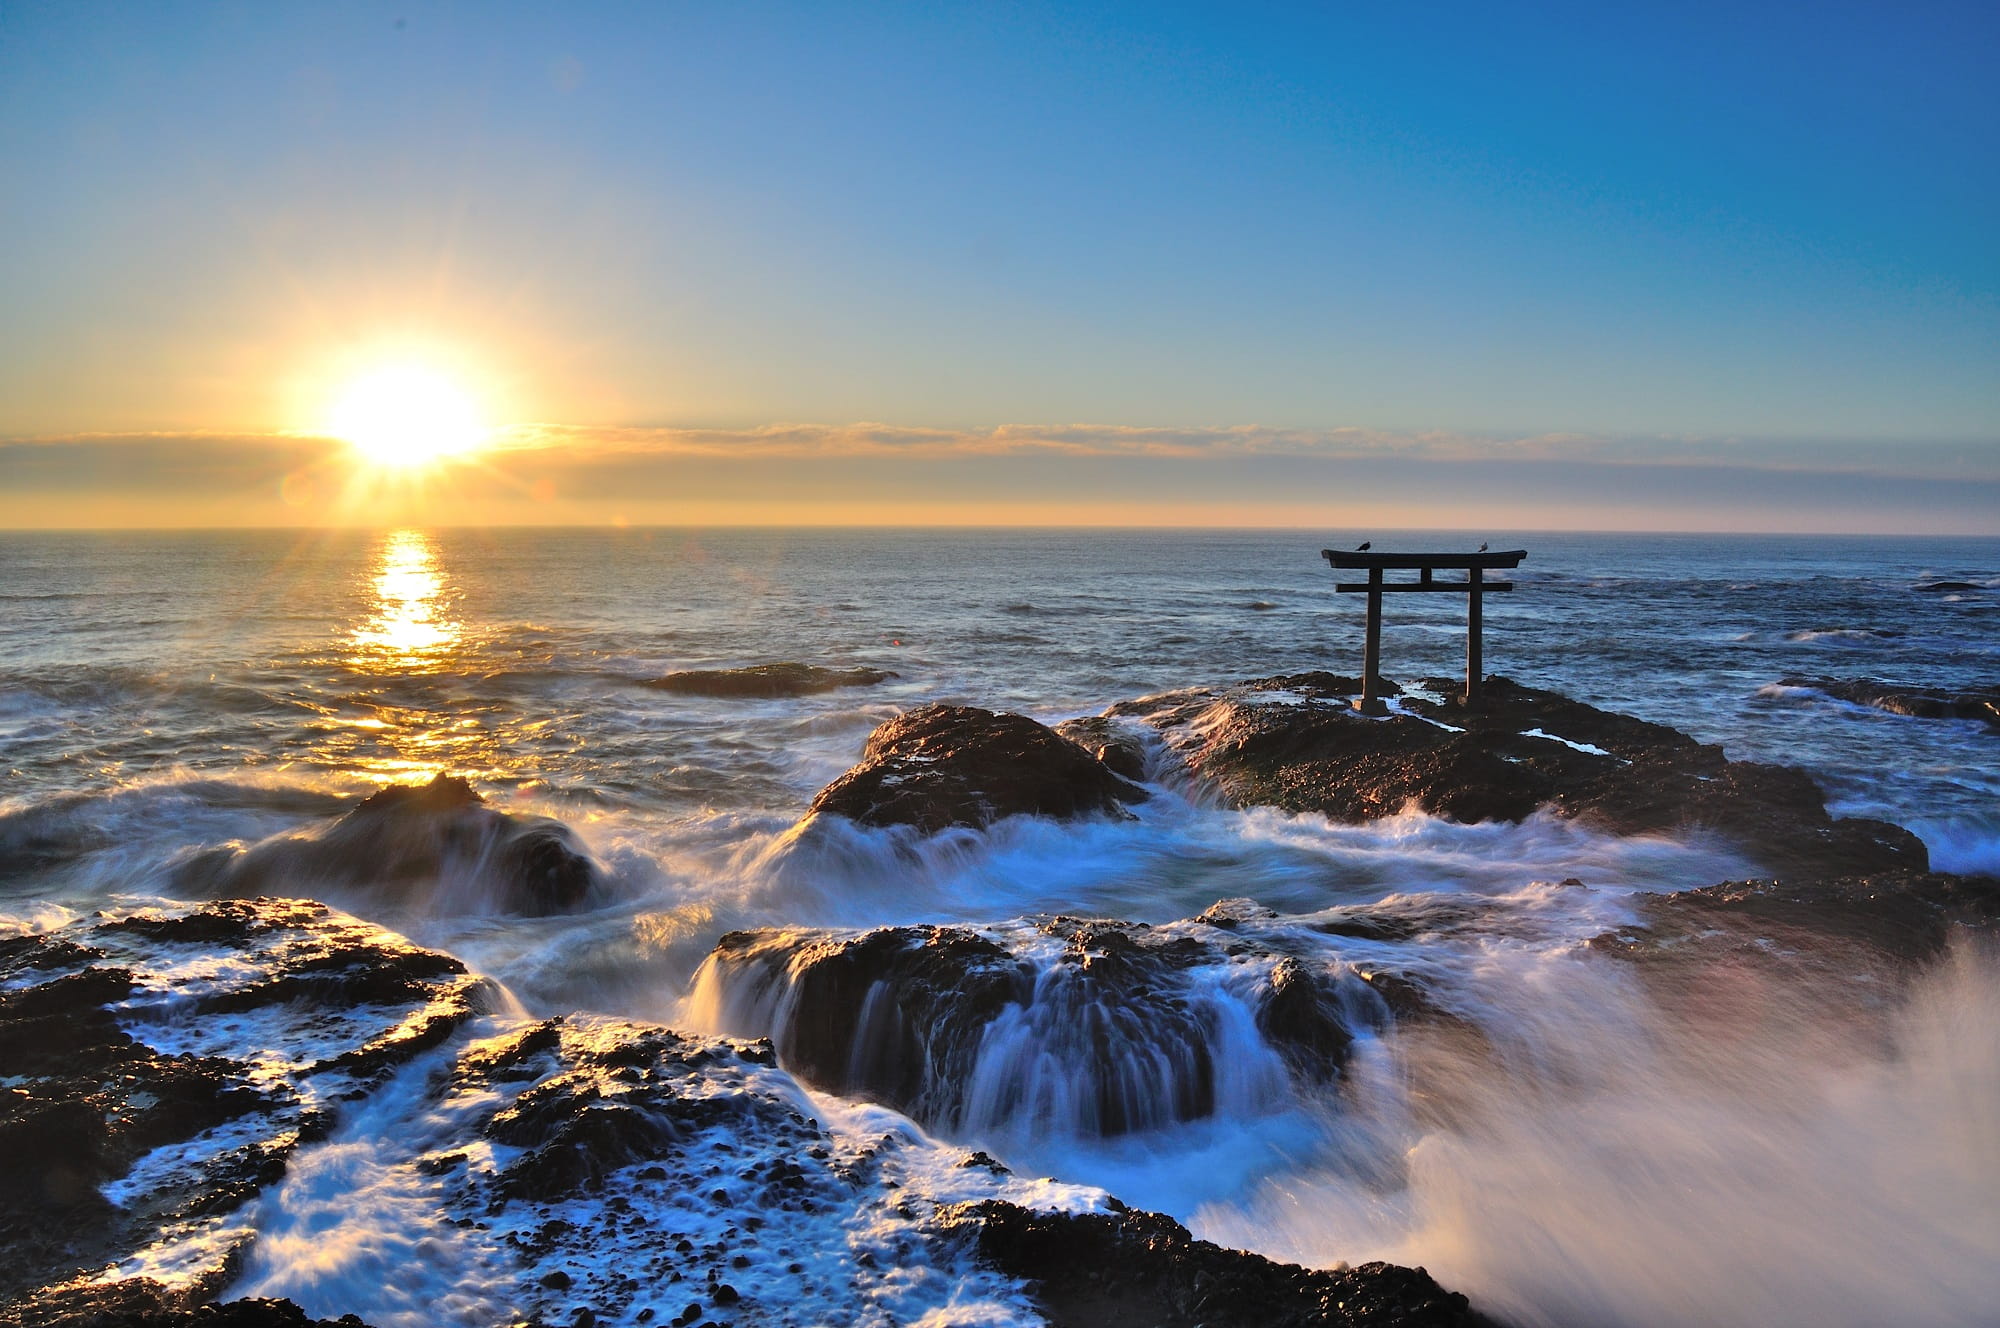 Take a break from the big city by heading out to Ibaraki for a stunning beach experience like none other.